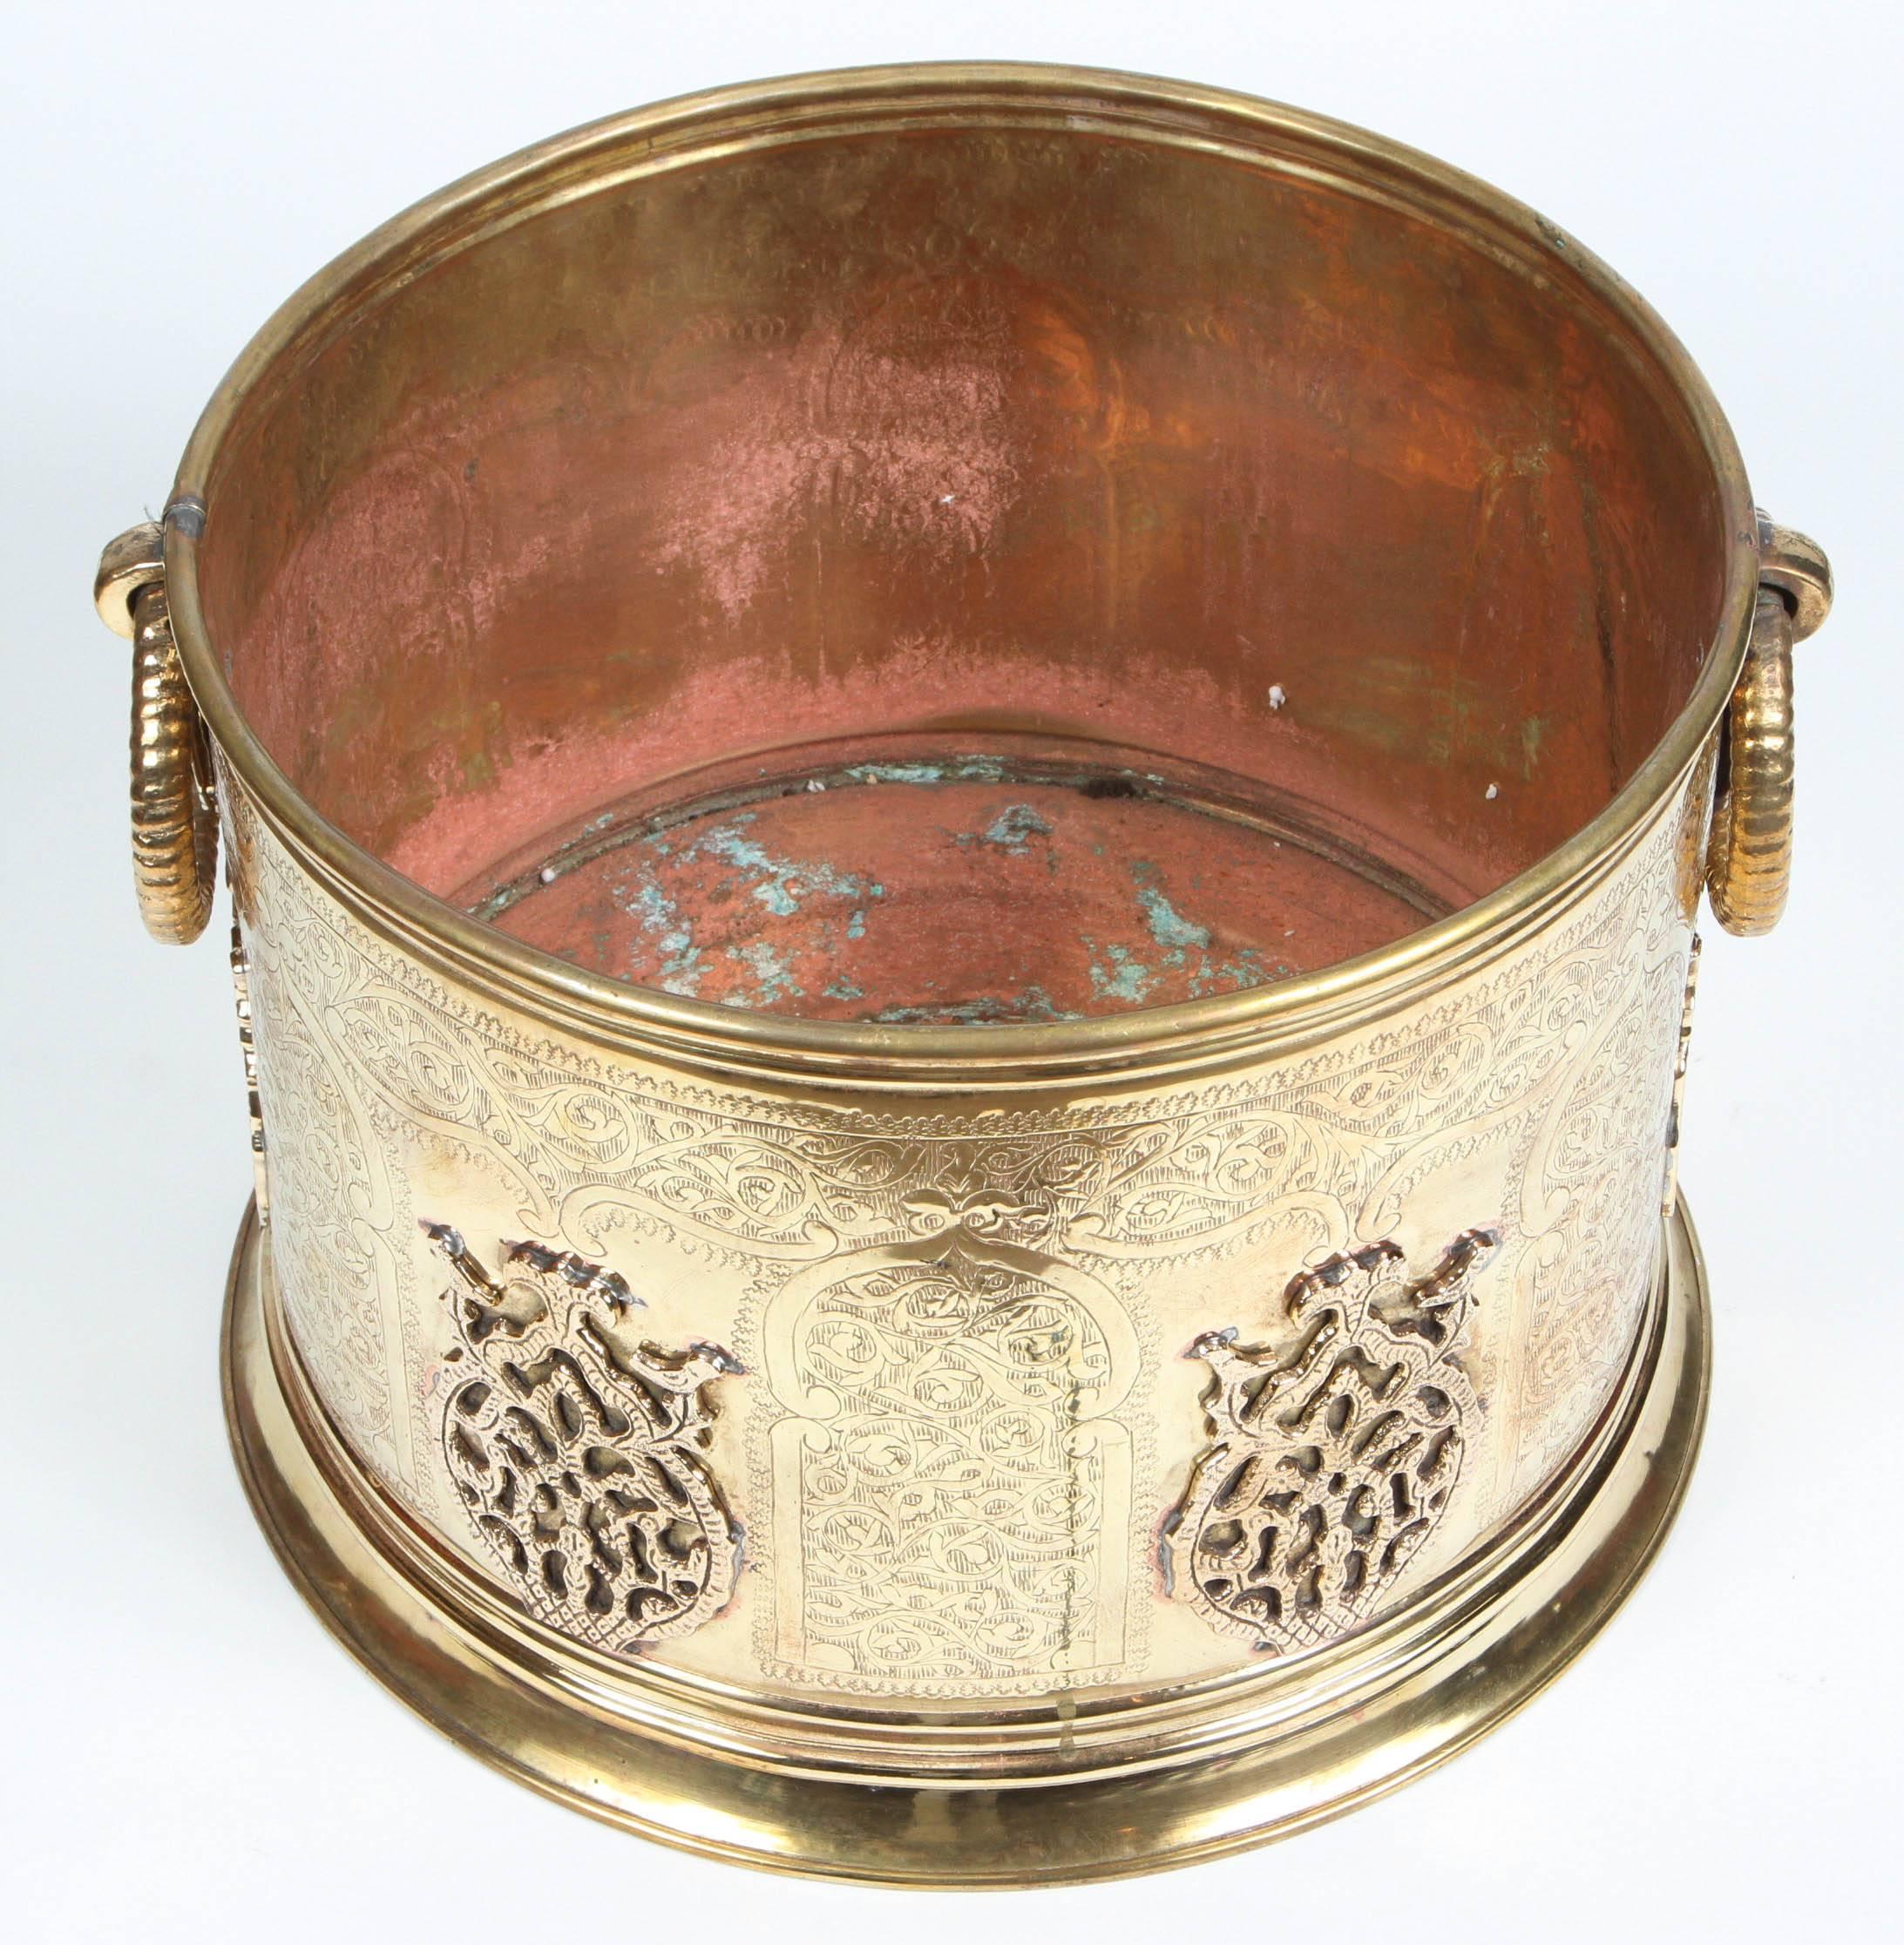 Large Moroccan Moorish polished brass planter, handcrafted and chiselled with fine Moorish arches and foliate designs.
On each side there are a round hand-carved handle, the interior is copper red and polished gold for the exterior.
Very decorative